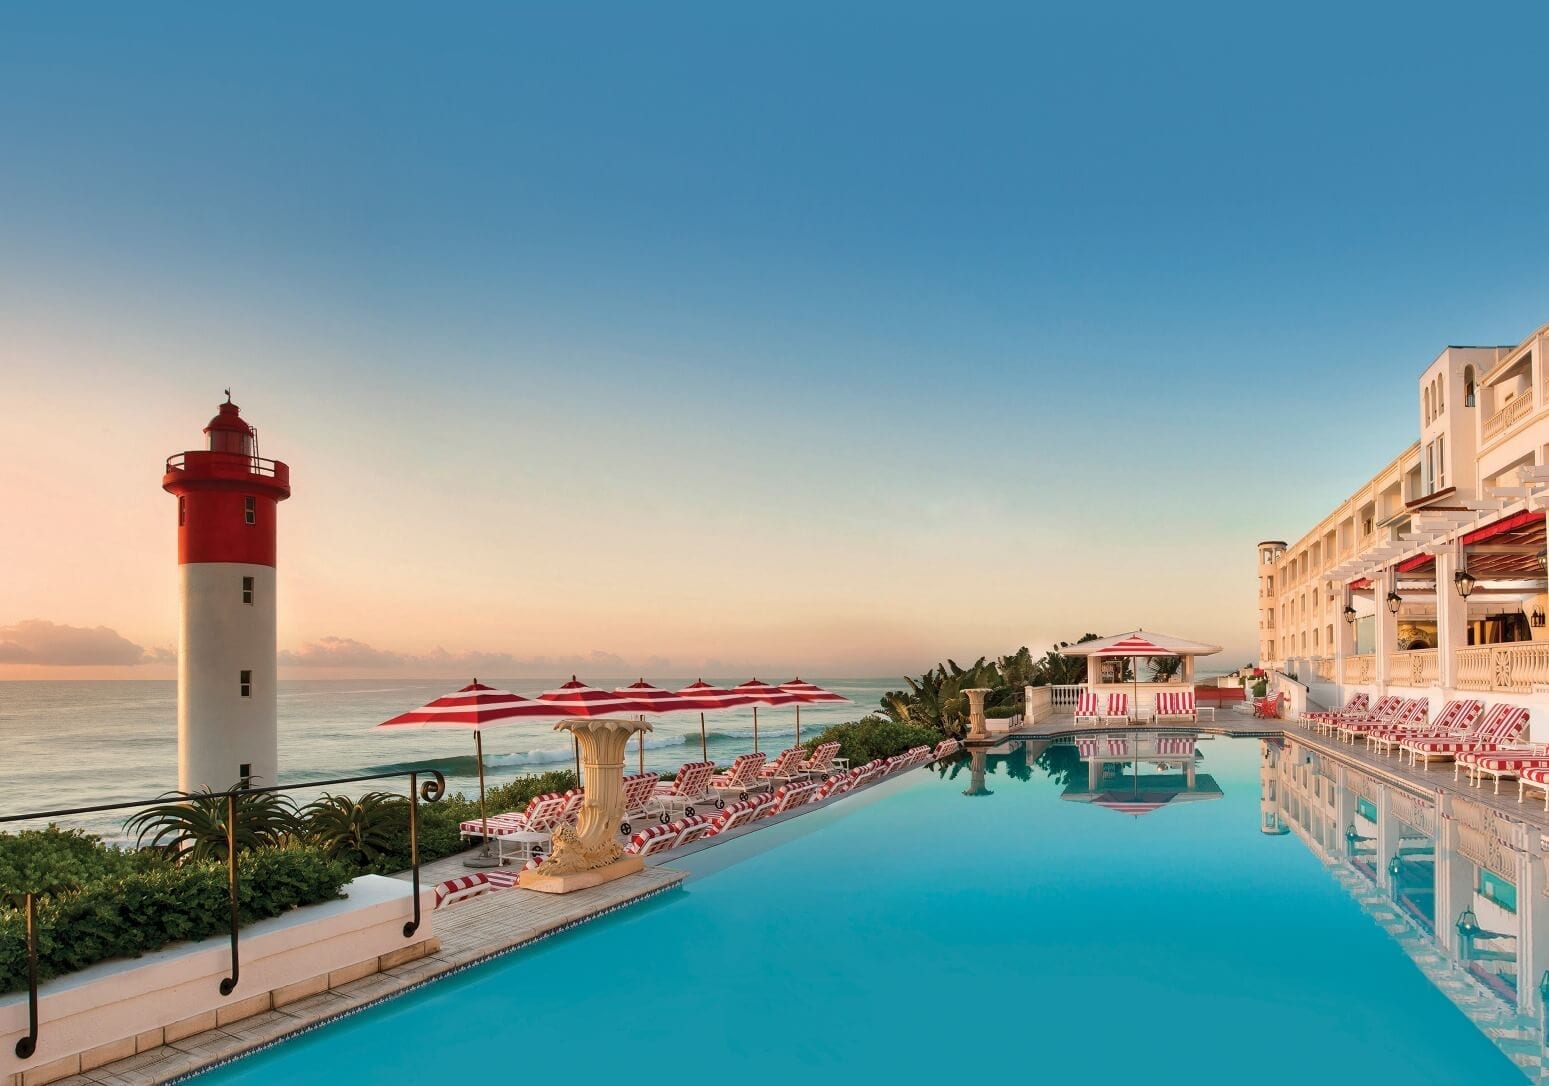 The Oysterbox Hotel in Umhlanga Rocks South Africa